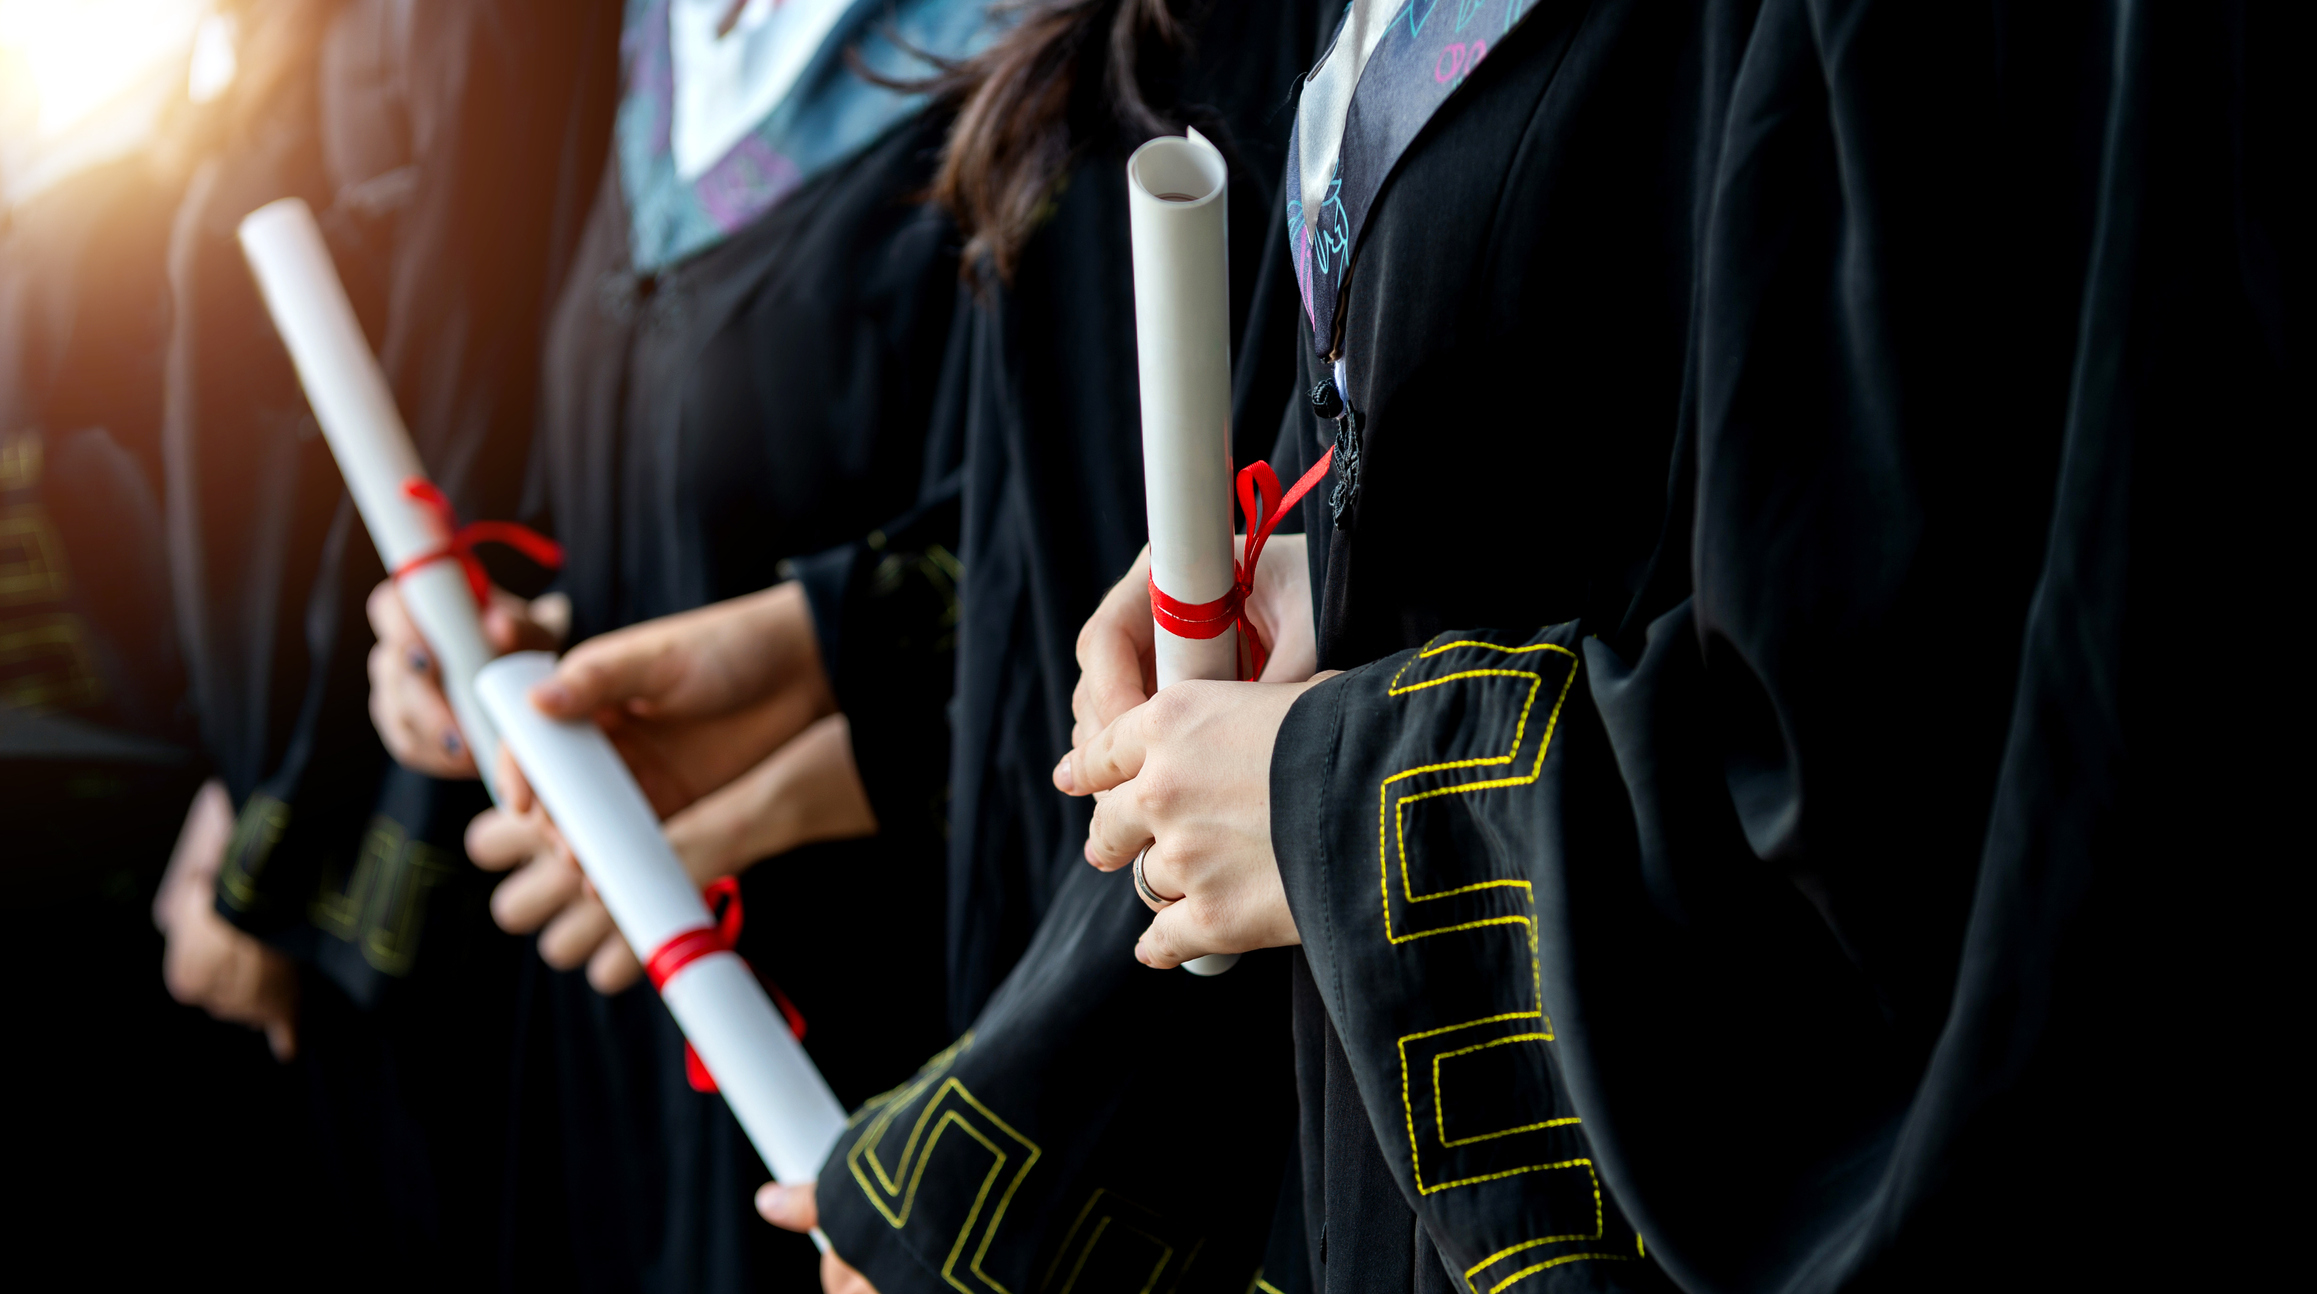 Graduated students holding diplomas in a line